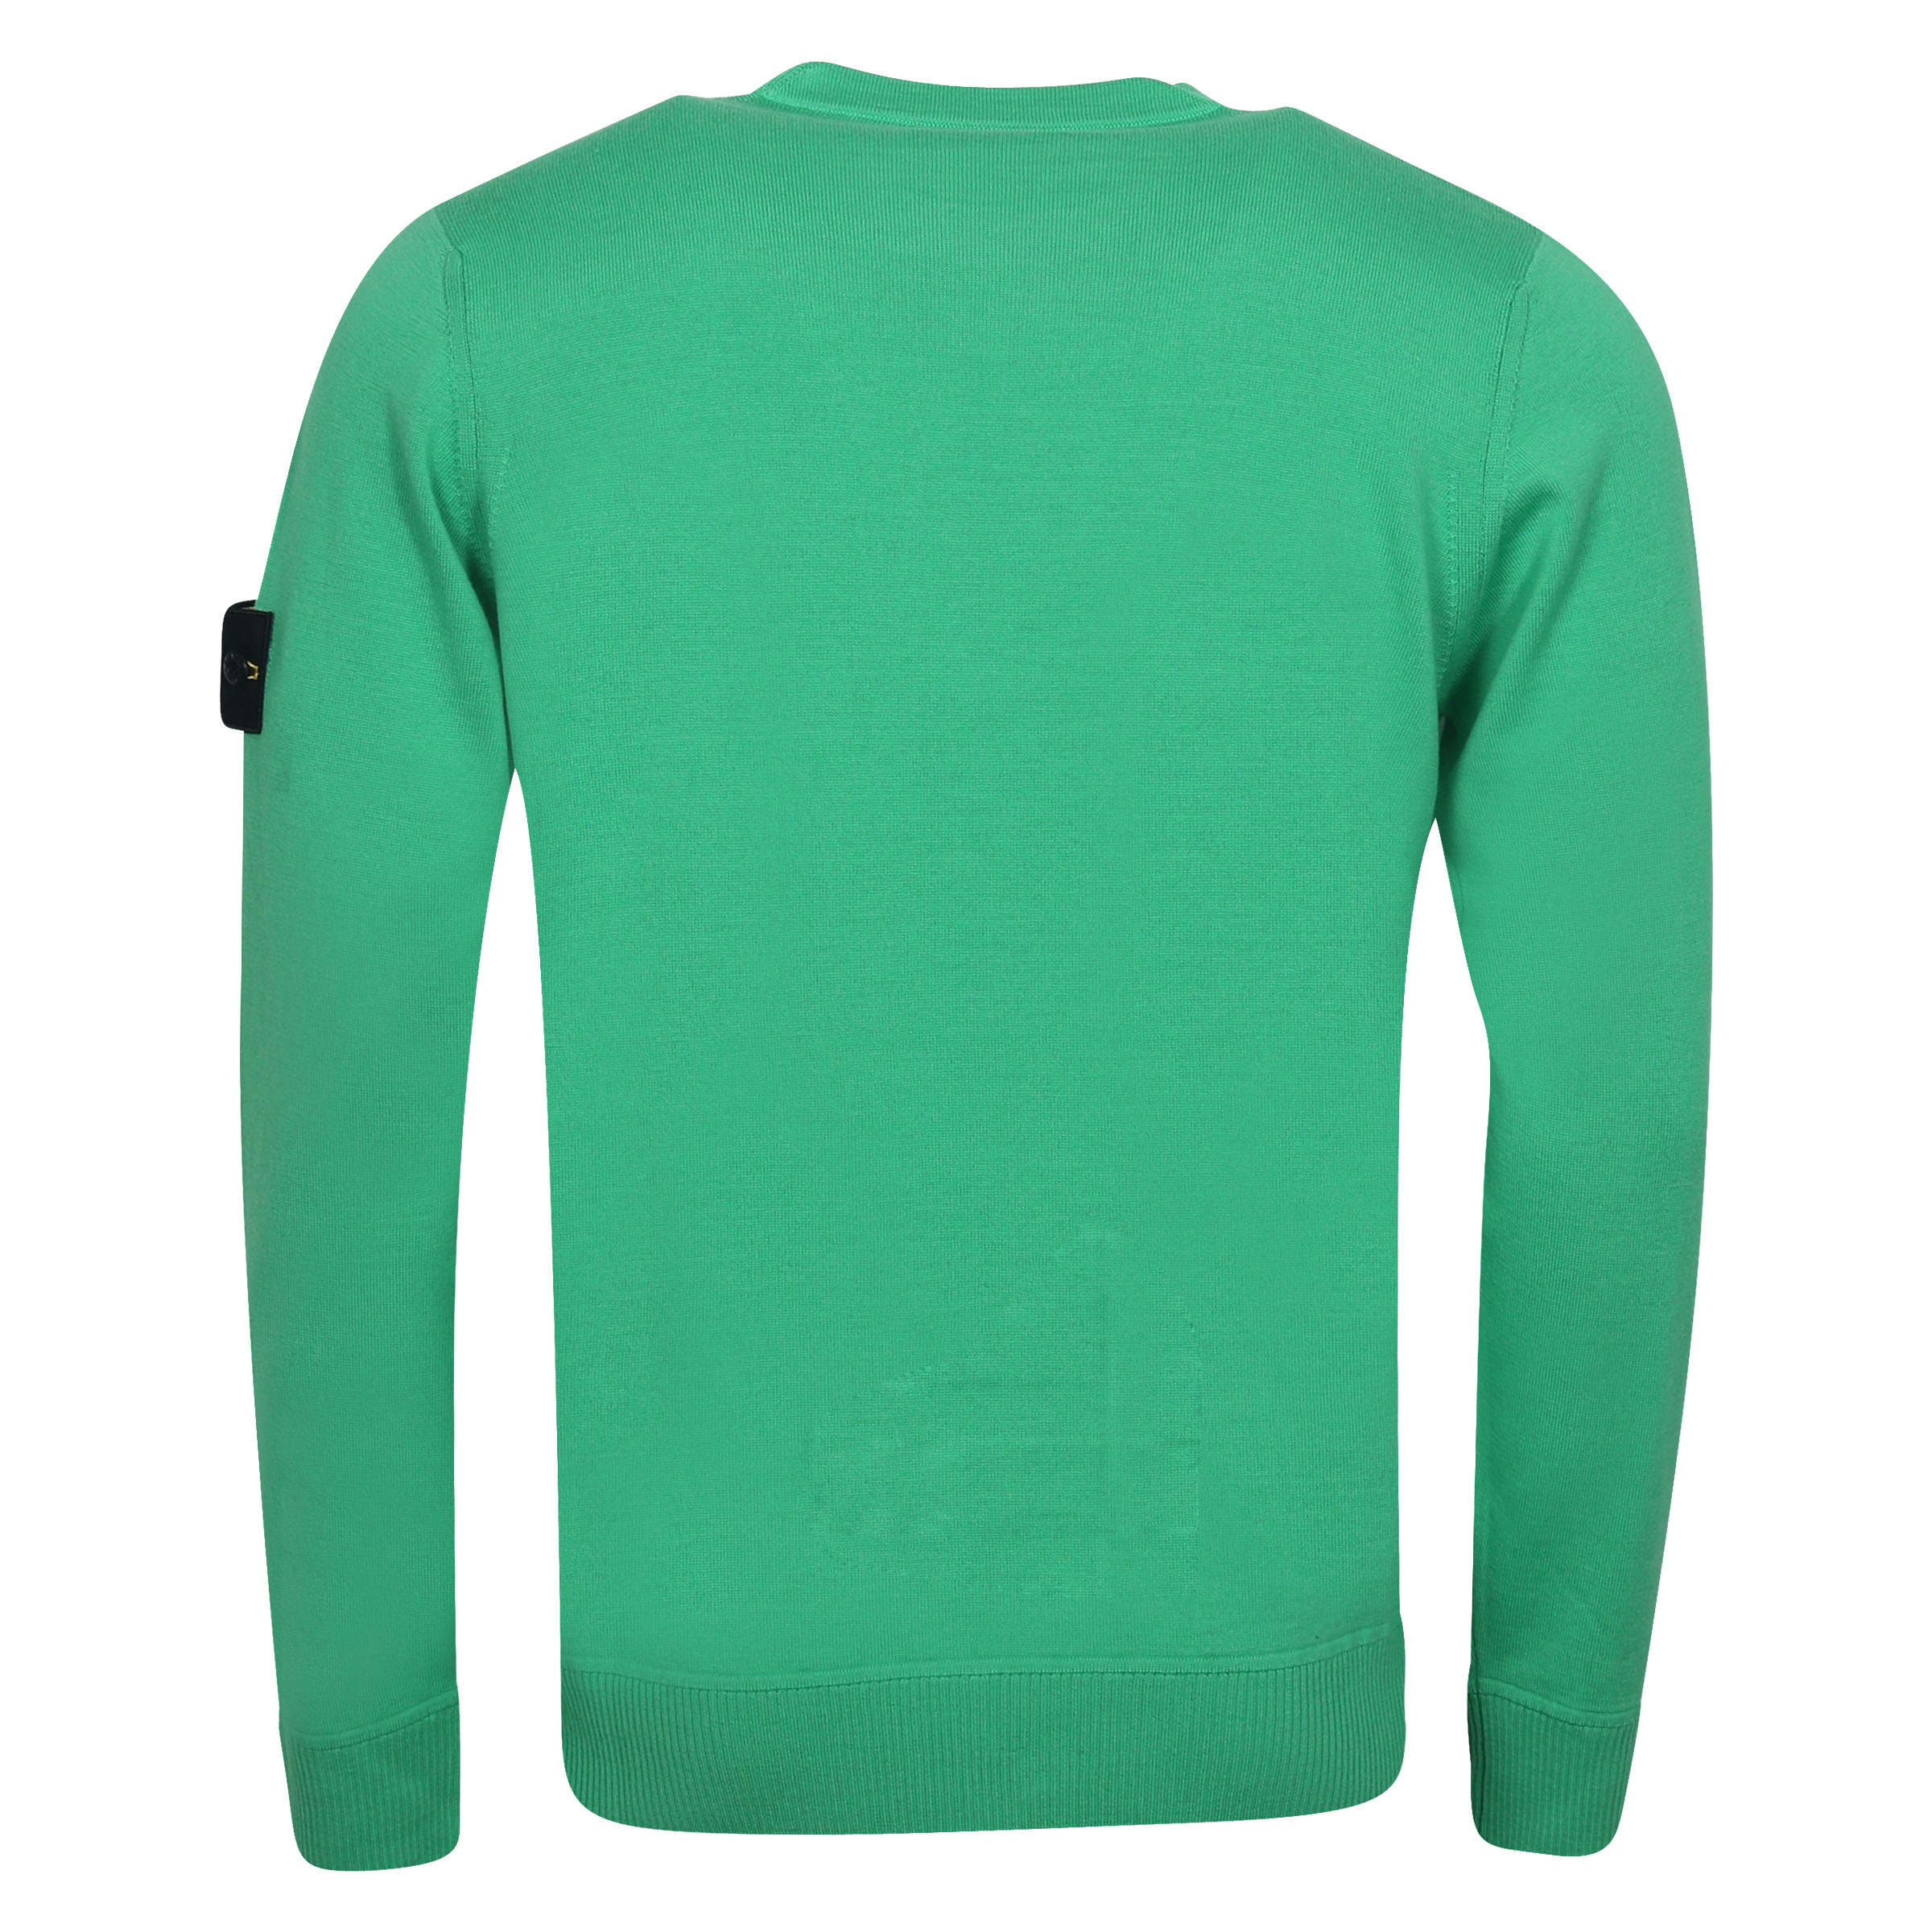 Stone Island Crew Neck Knit Sweater in Green S